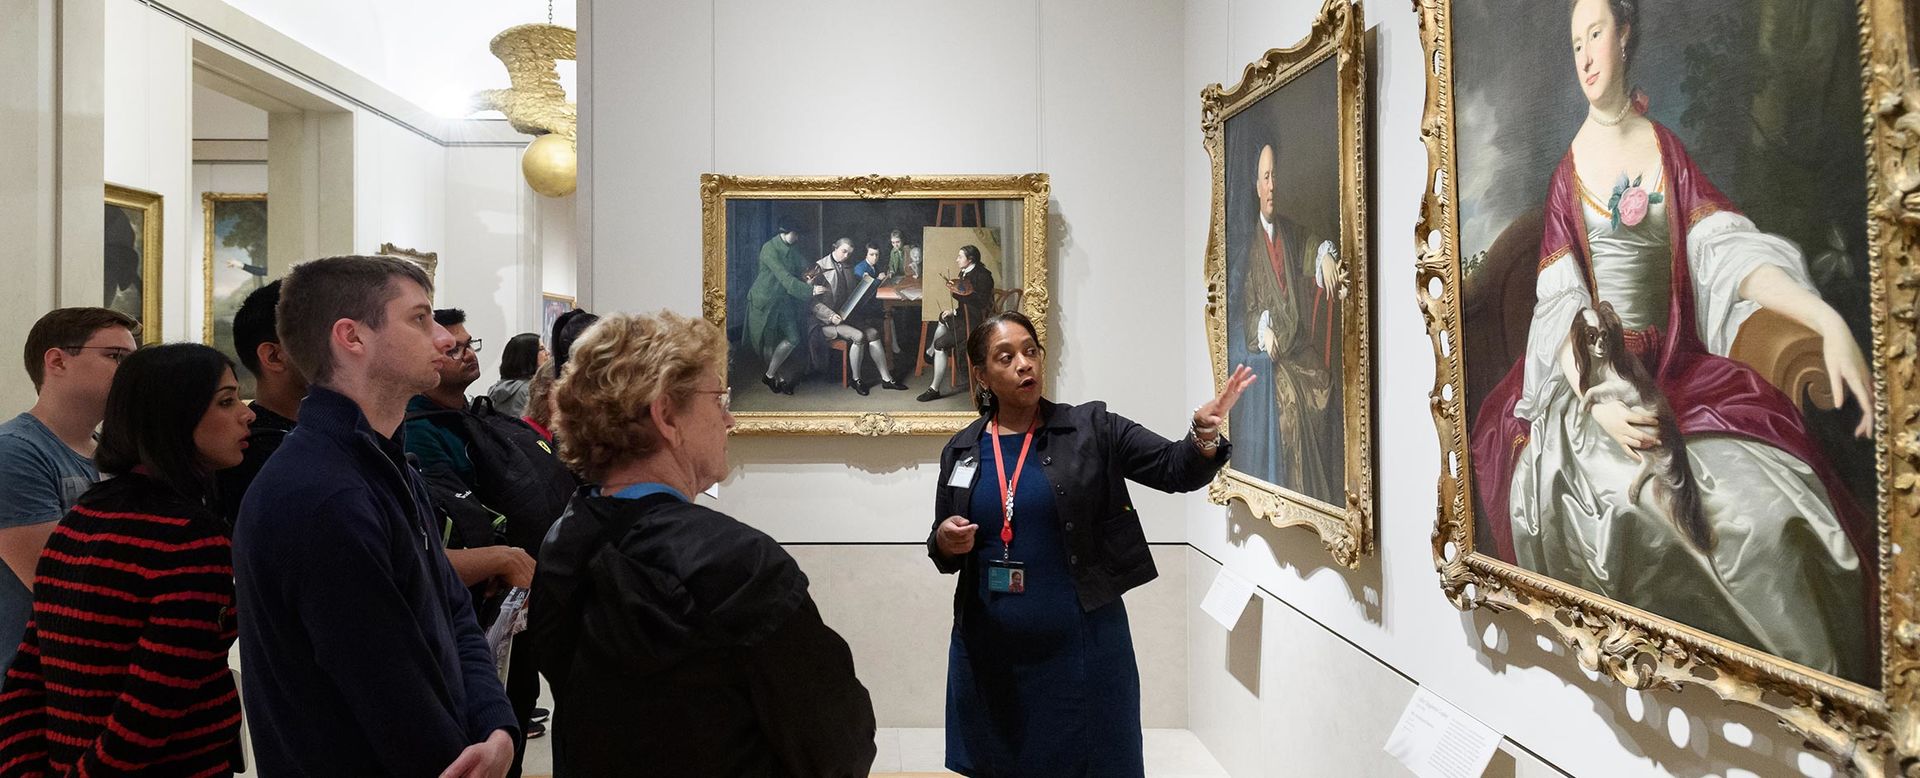 A female volunteer leads a group of visitors on a tour in the American Wing. She is gesturing towards and discussing an oil painting in The Met collection.